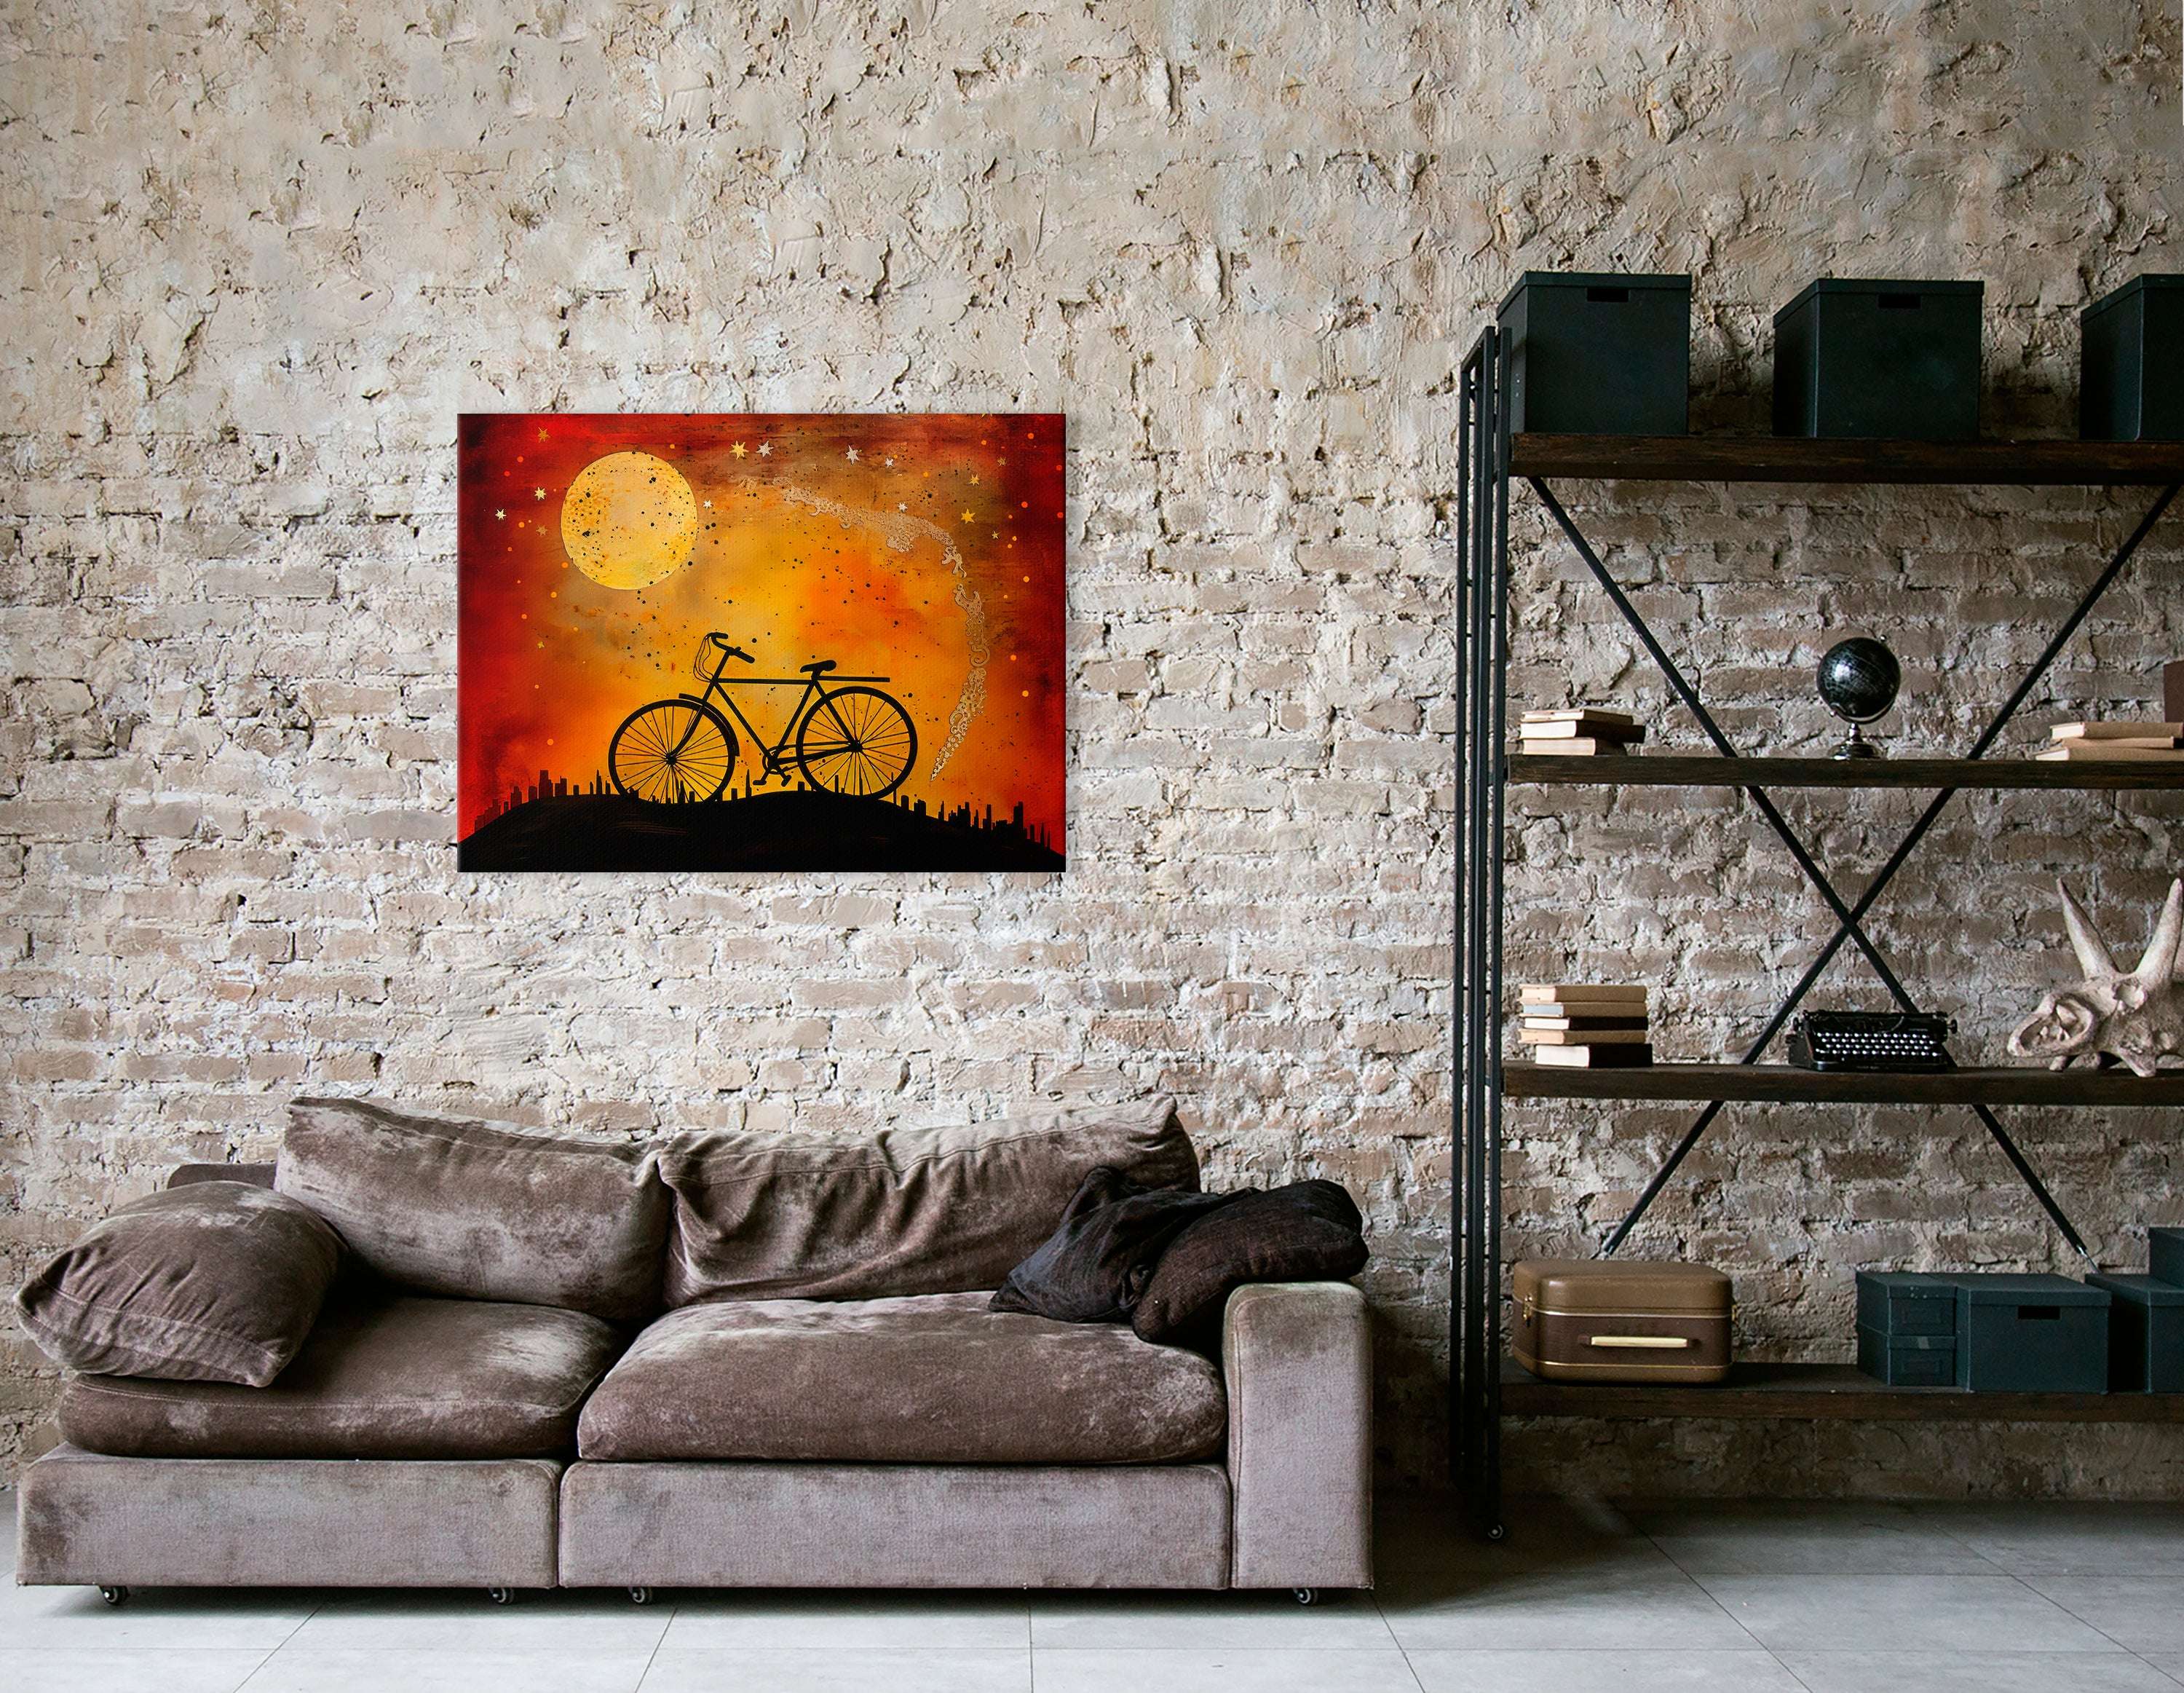 Bicycle in the Night with Red and Amber Sky - Canvas Print - Artoholica Ready to Hang Canvas Print